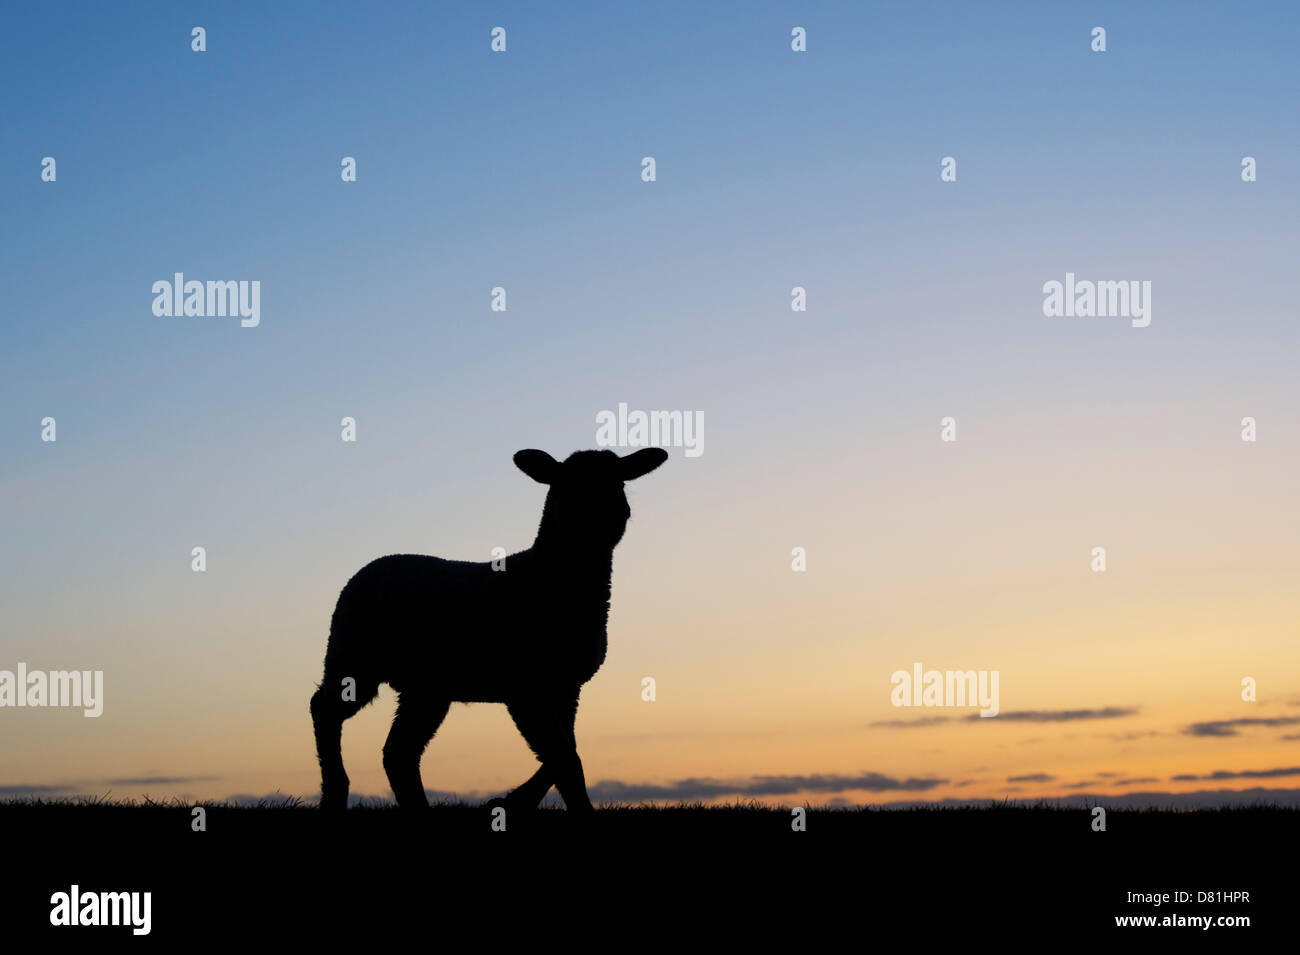 Silhouette of sheep / spring lamb standing on a hill at sunrise Stock Photo